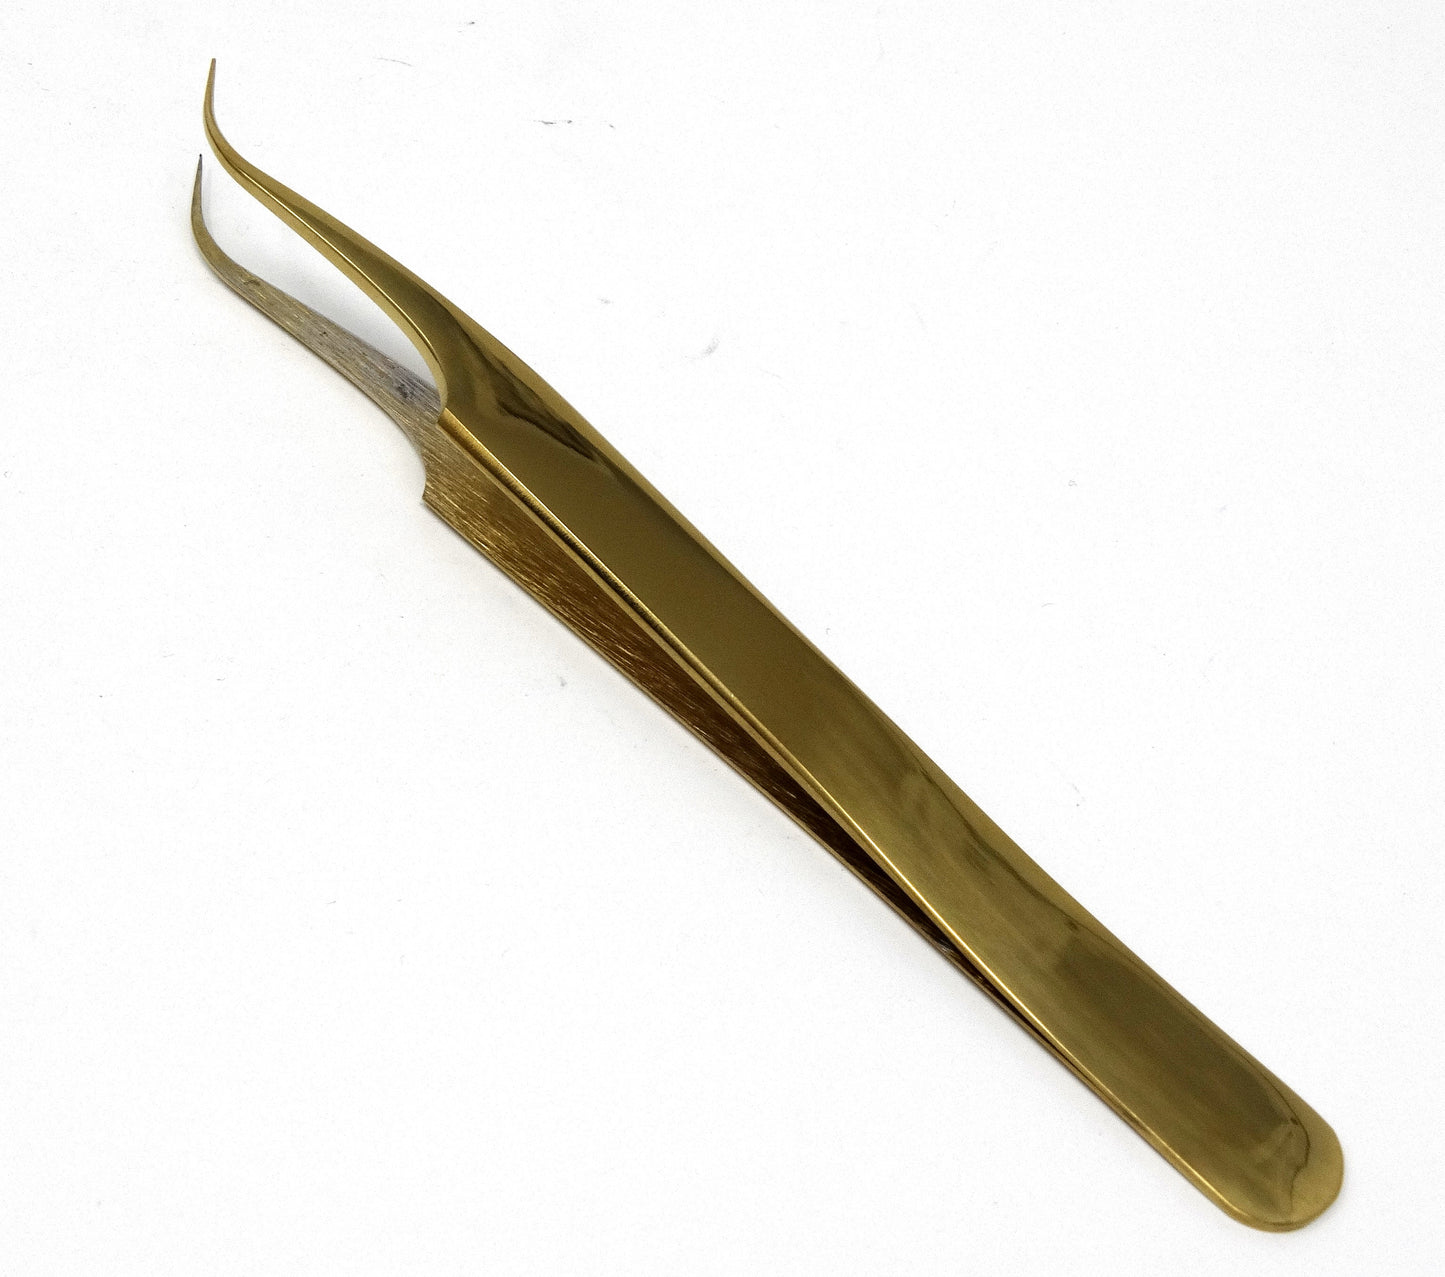 Stainless Steel Watch & Jewelery Repair Tweezers #7 Forceps, Fine Point, Gold Plated, Premium Quality